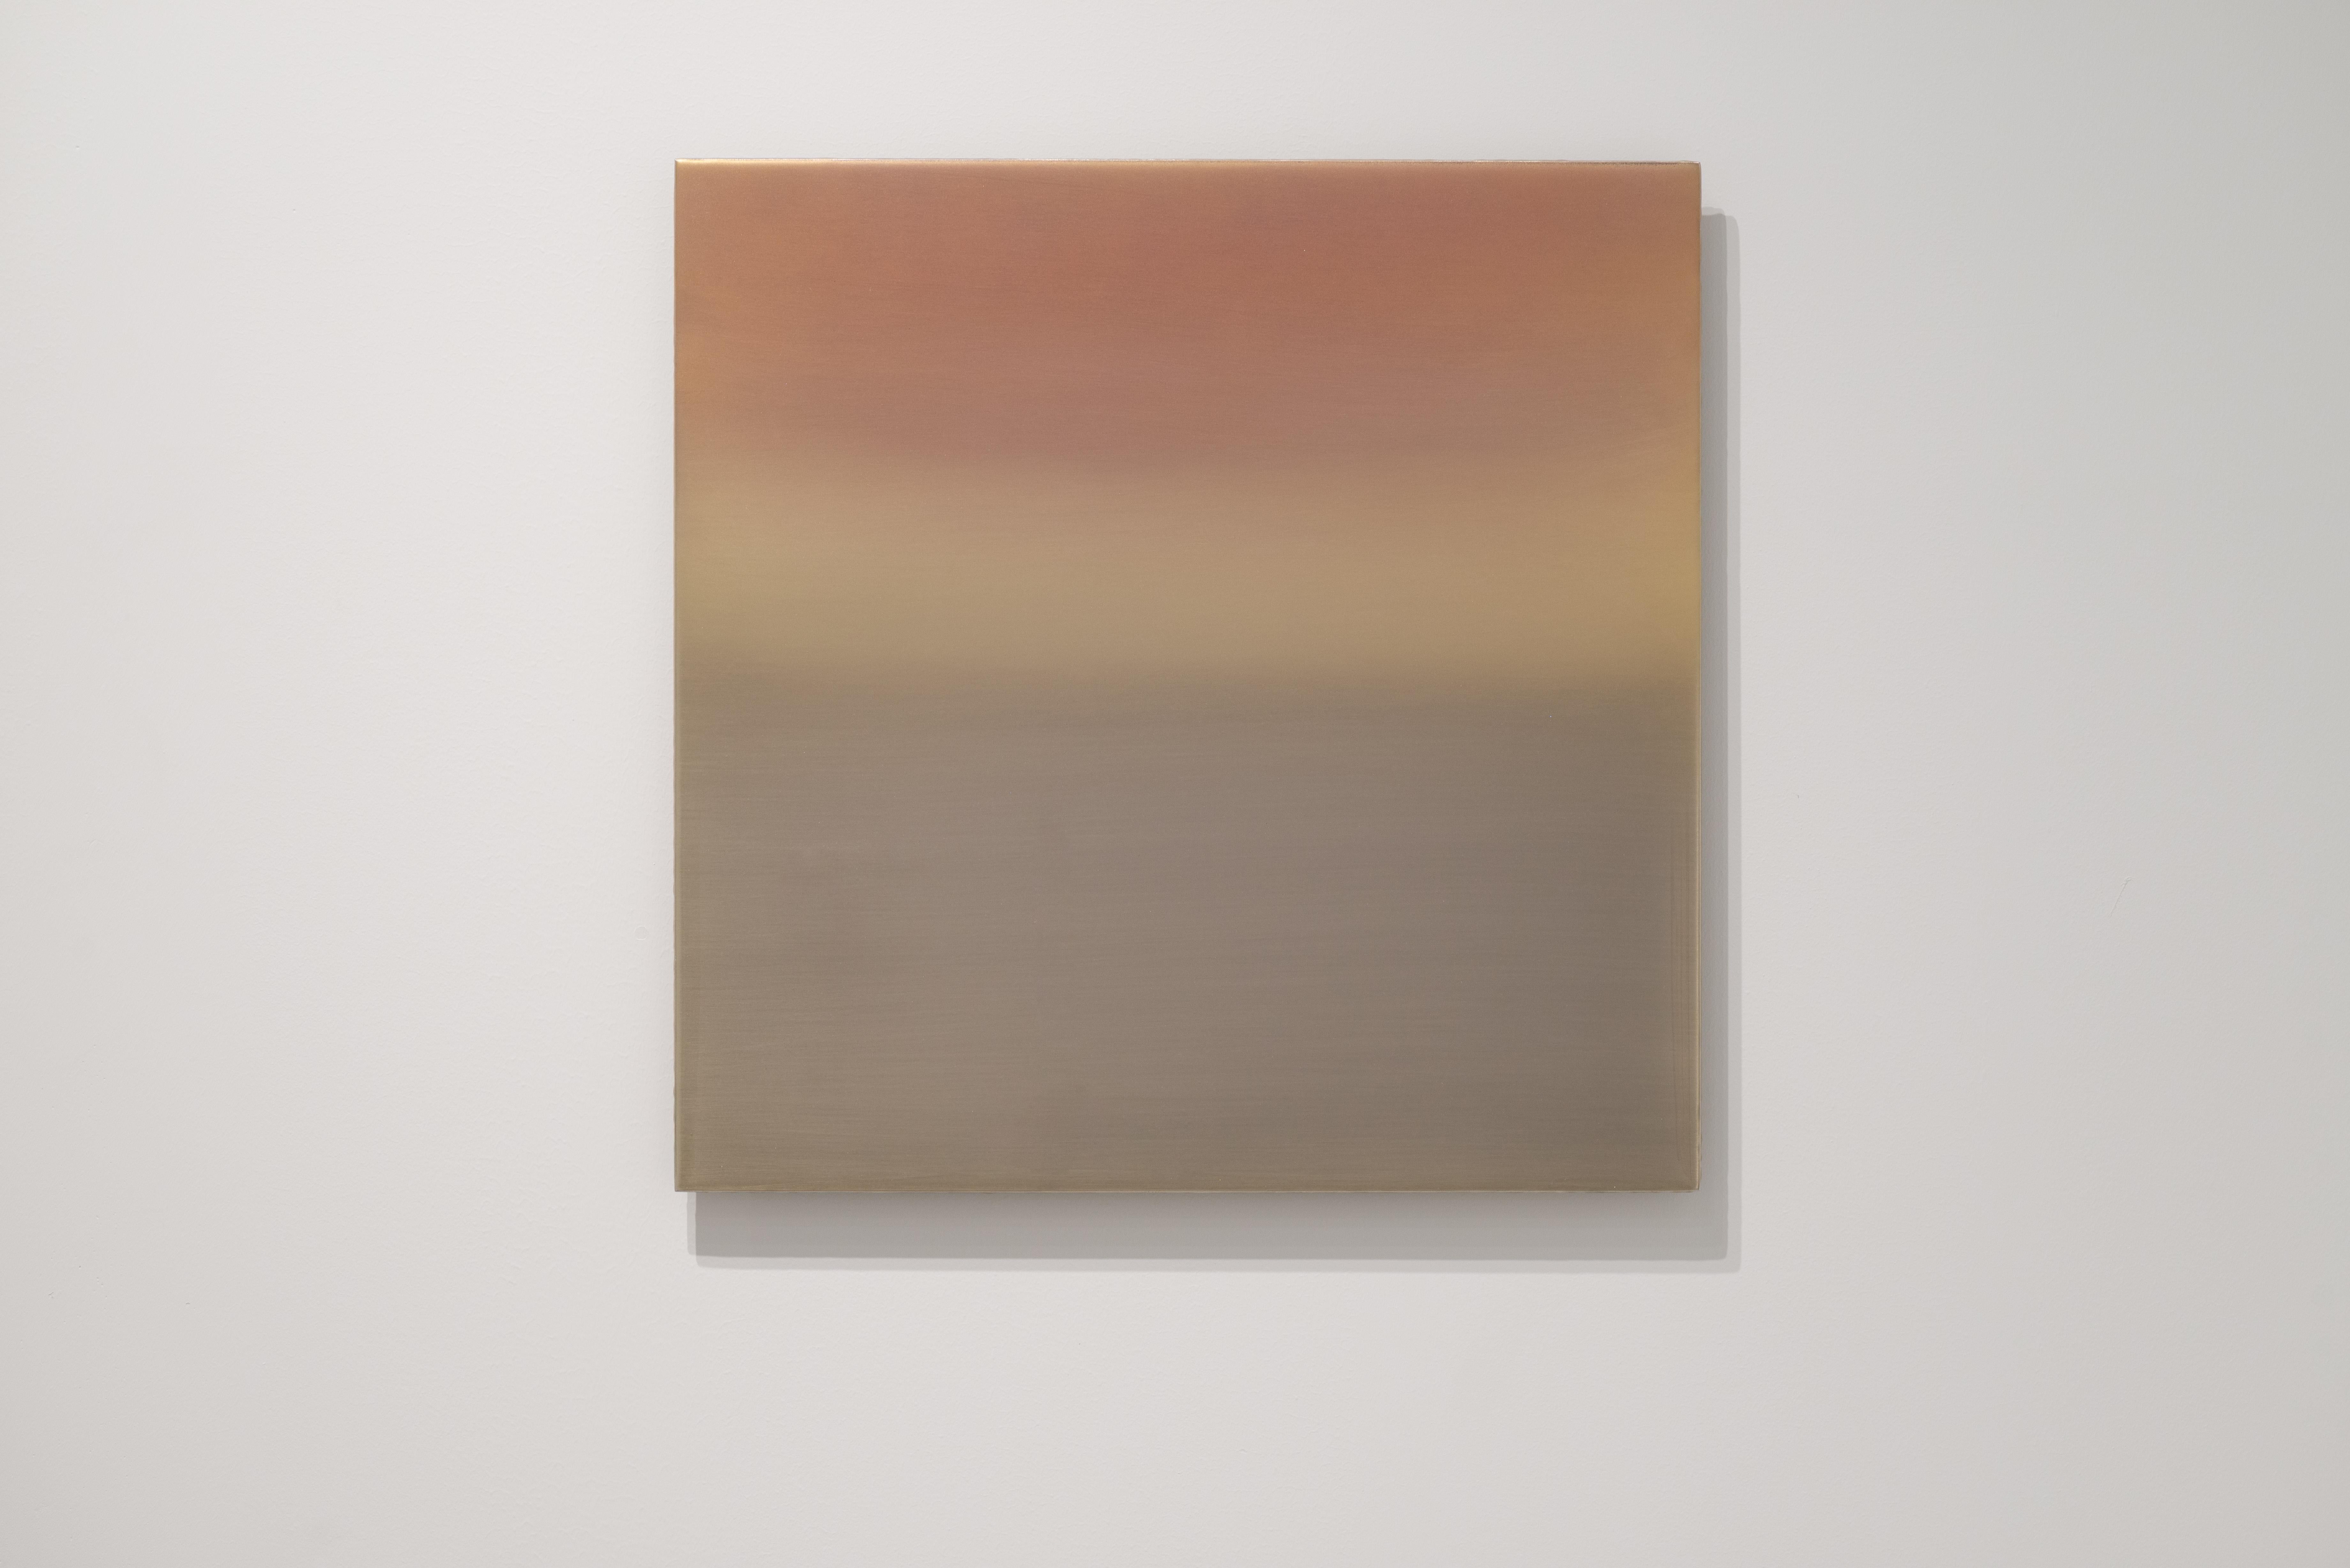 Square iridescent rose gold lavender painting on metal - Painting by Miya Ando